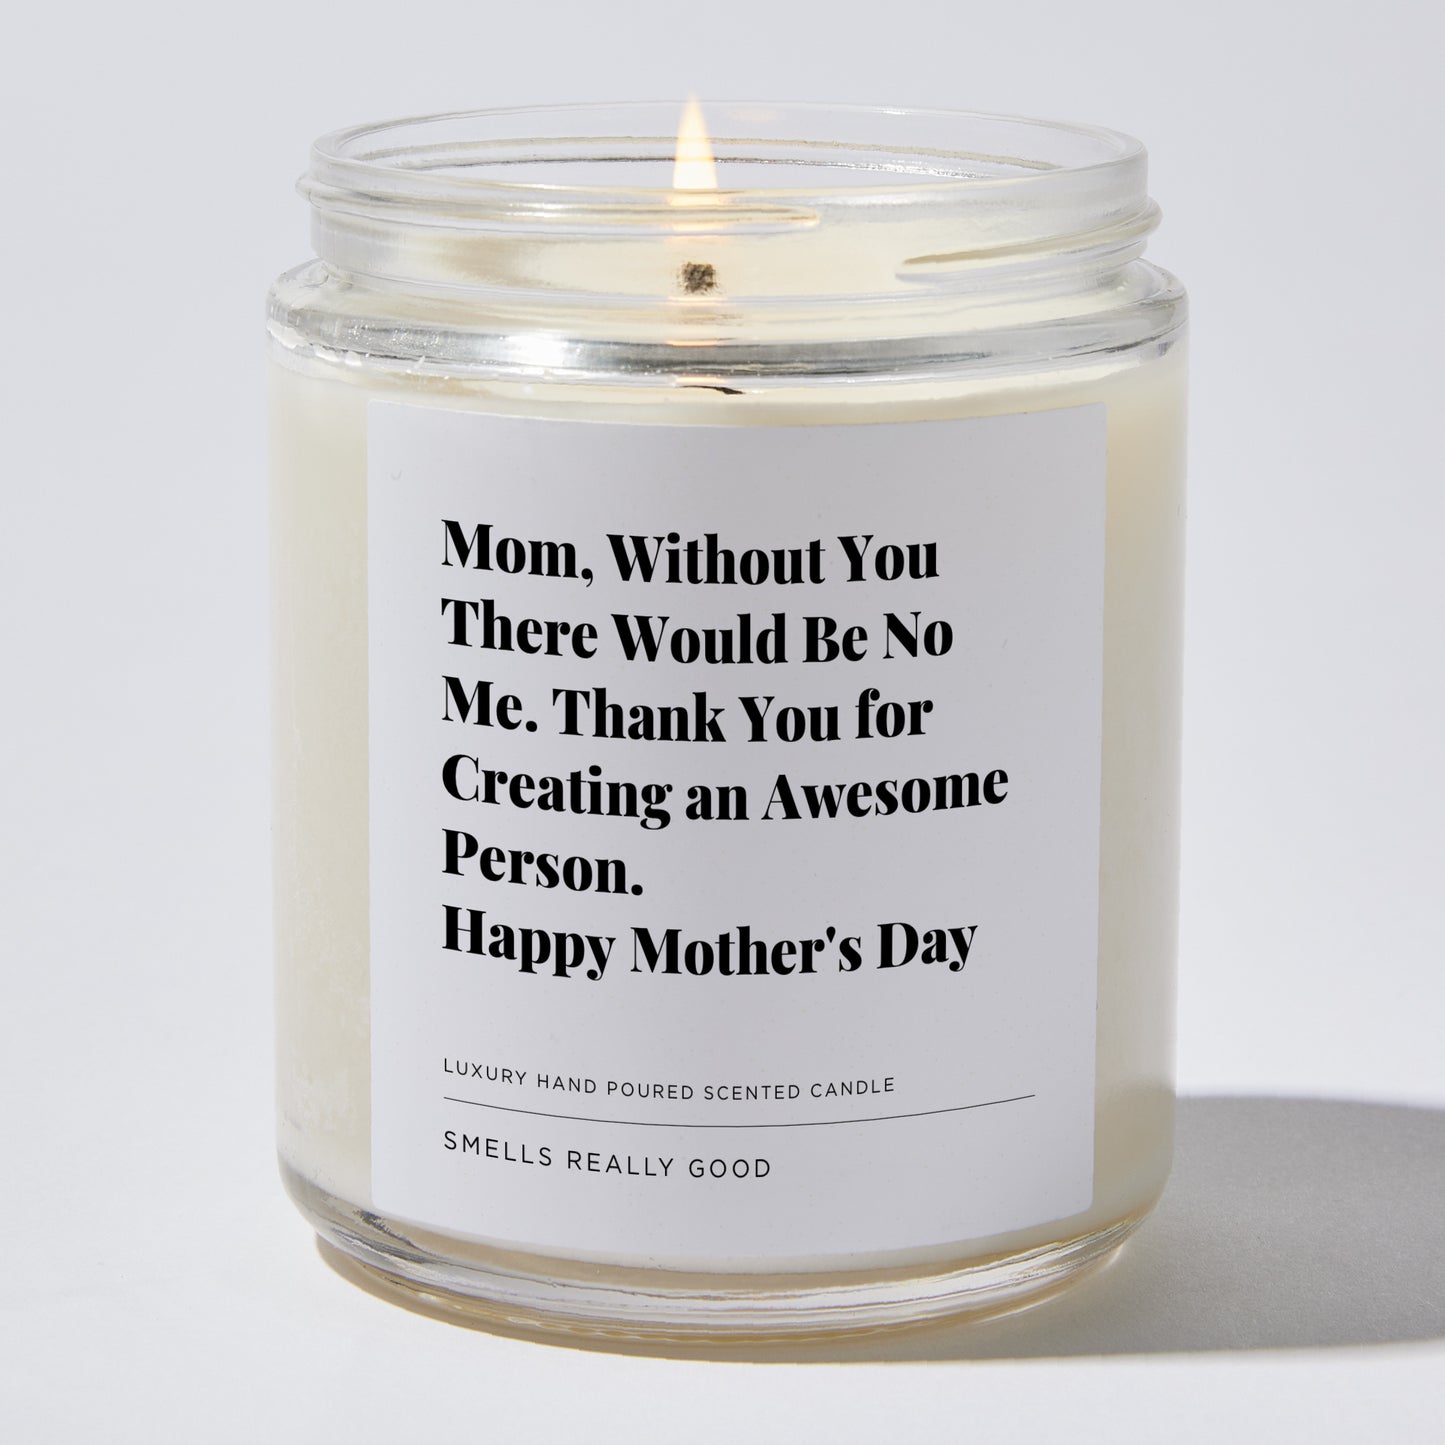 Gift for Mom - Mom, without you there would be no me. Thank you for creating an awesome person. Happy Mother's Day - Candle